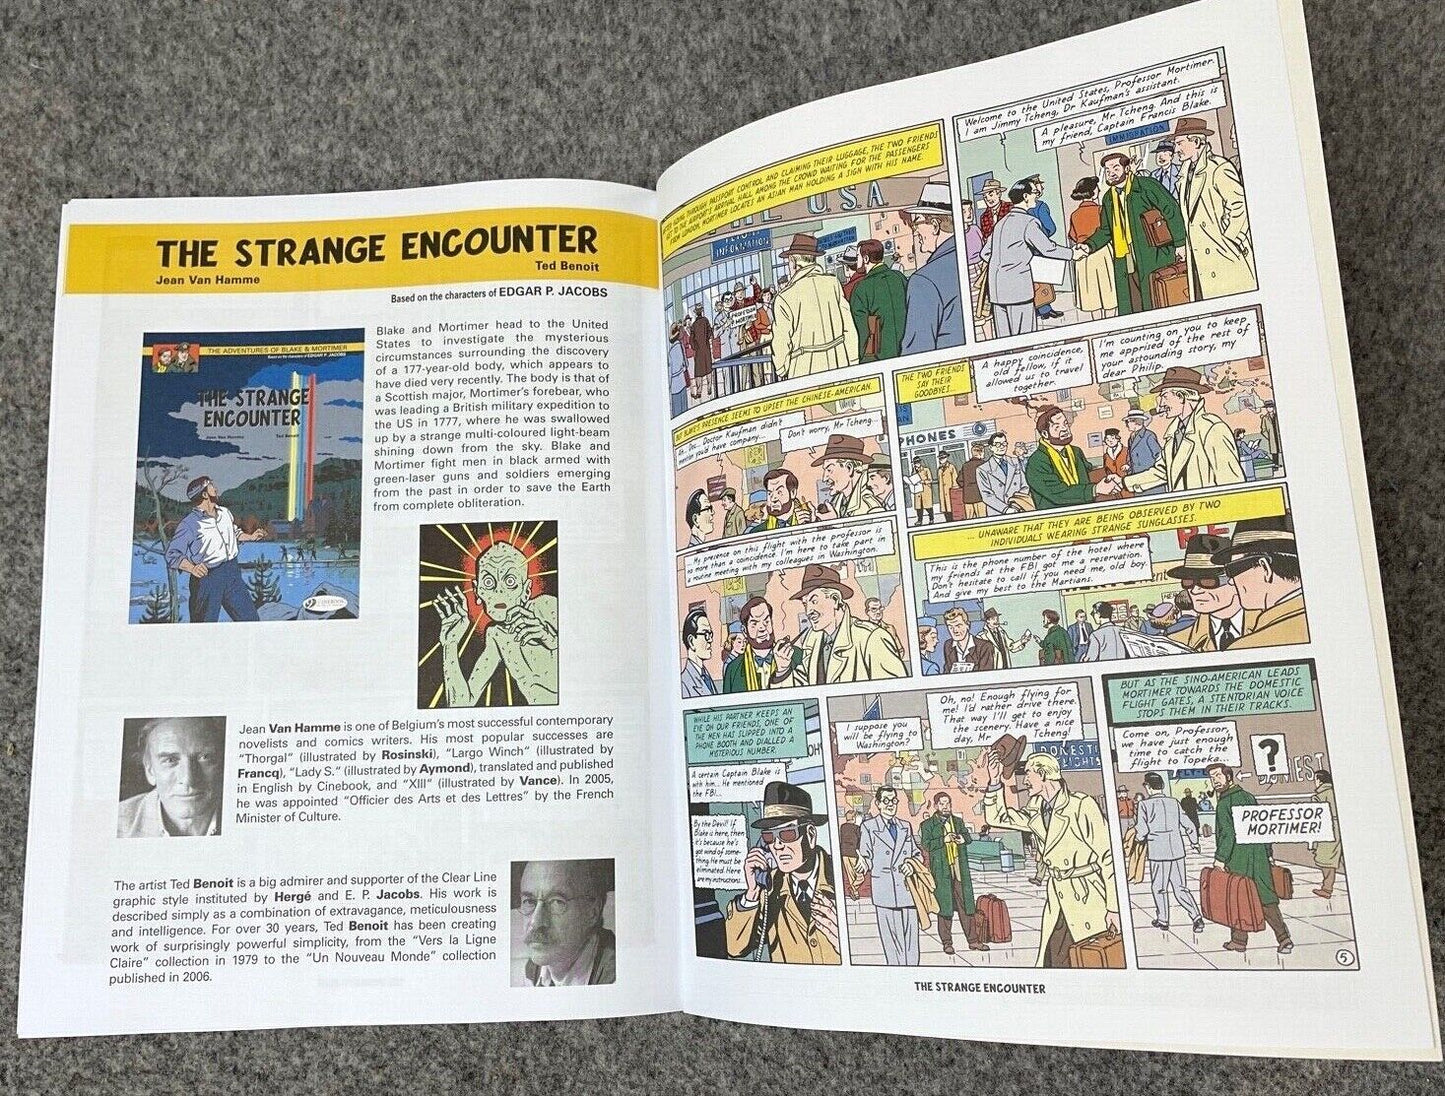 The Affair of the Necklace - Blake & Mortimer Comic Volume 7 - Cinebook UK Paperback Edition